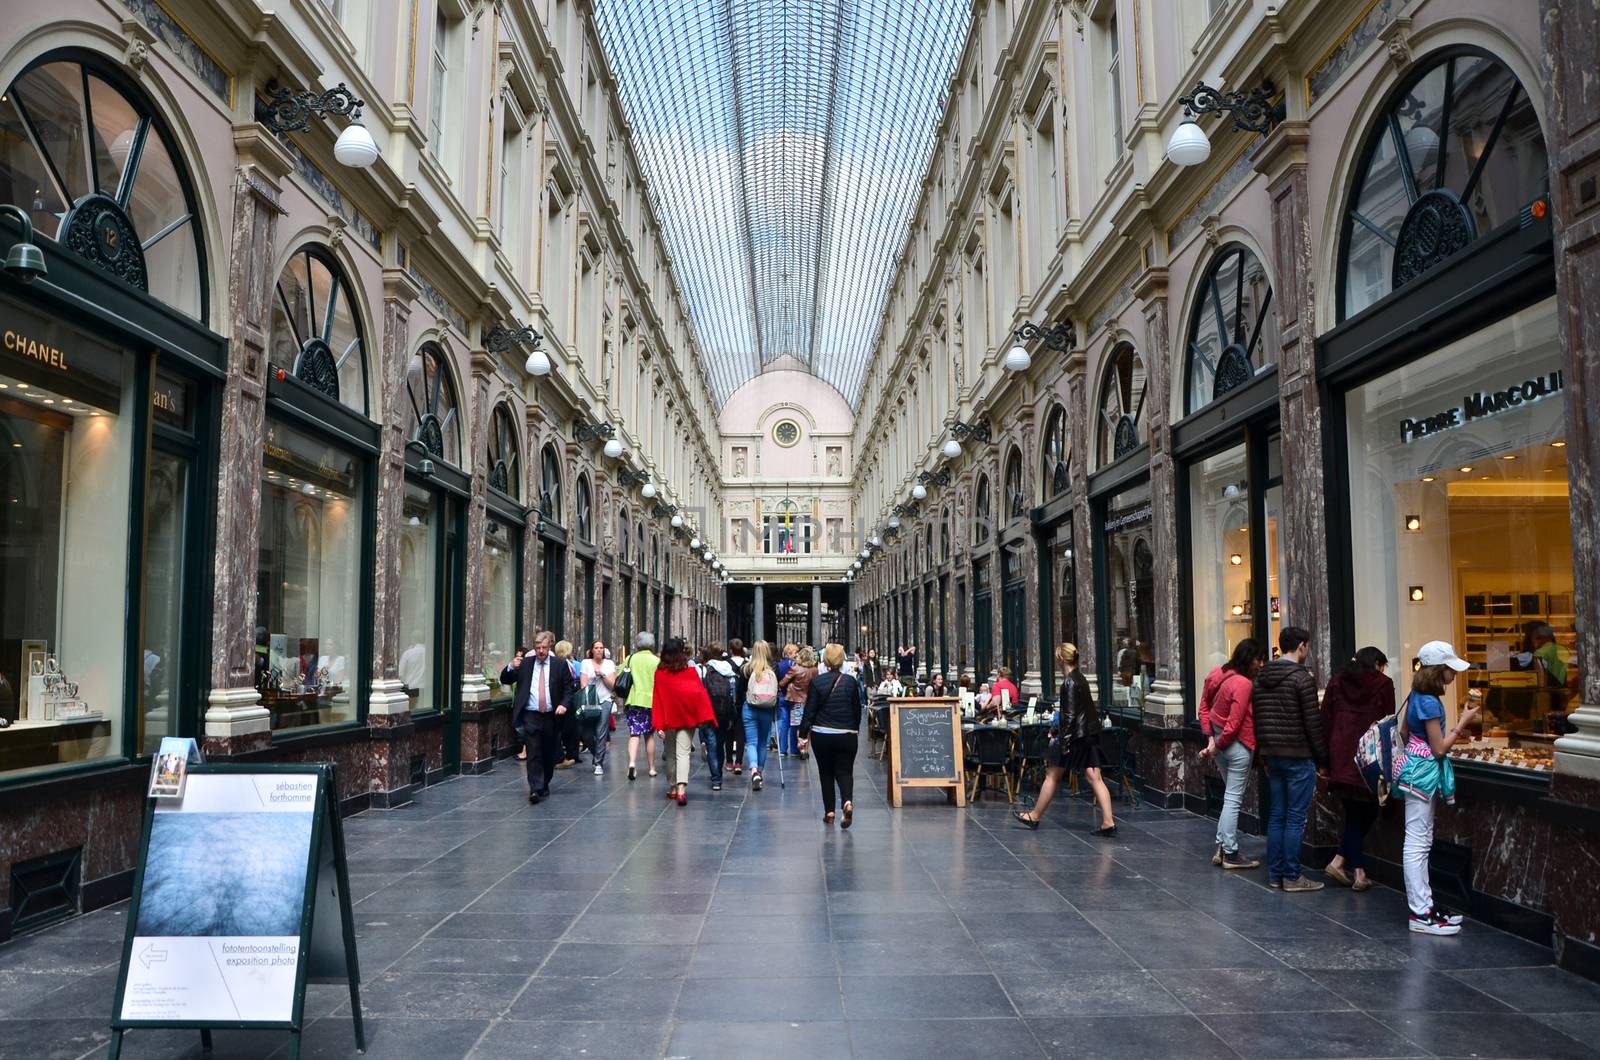 Brussels, Belgium - May 12, 2015: Tourists shopping at The Galeries Royales Saint-Hubert in Brussels, Belgium. This place is a glazed shopping arcade in Brussels that preceded other famous 19th-century shopping arcades.